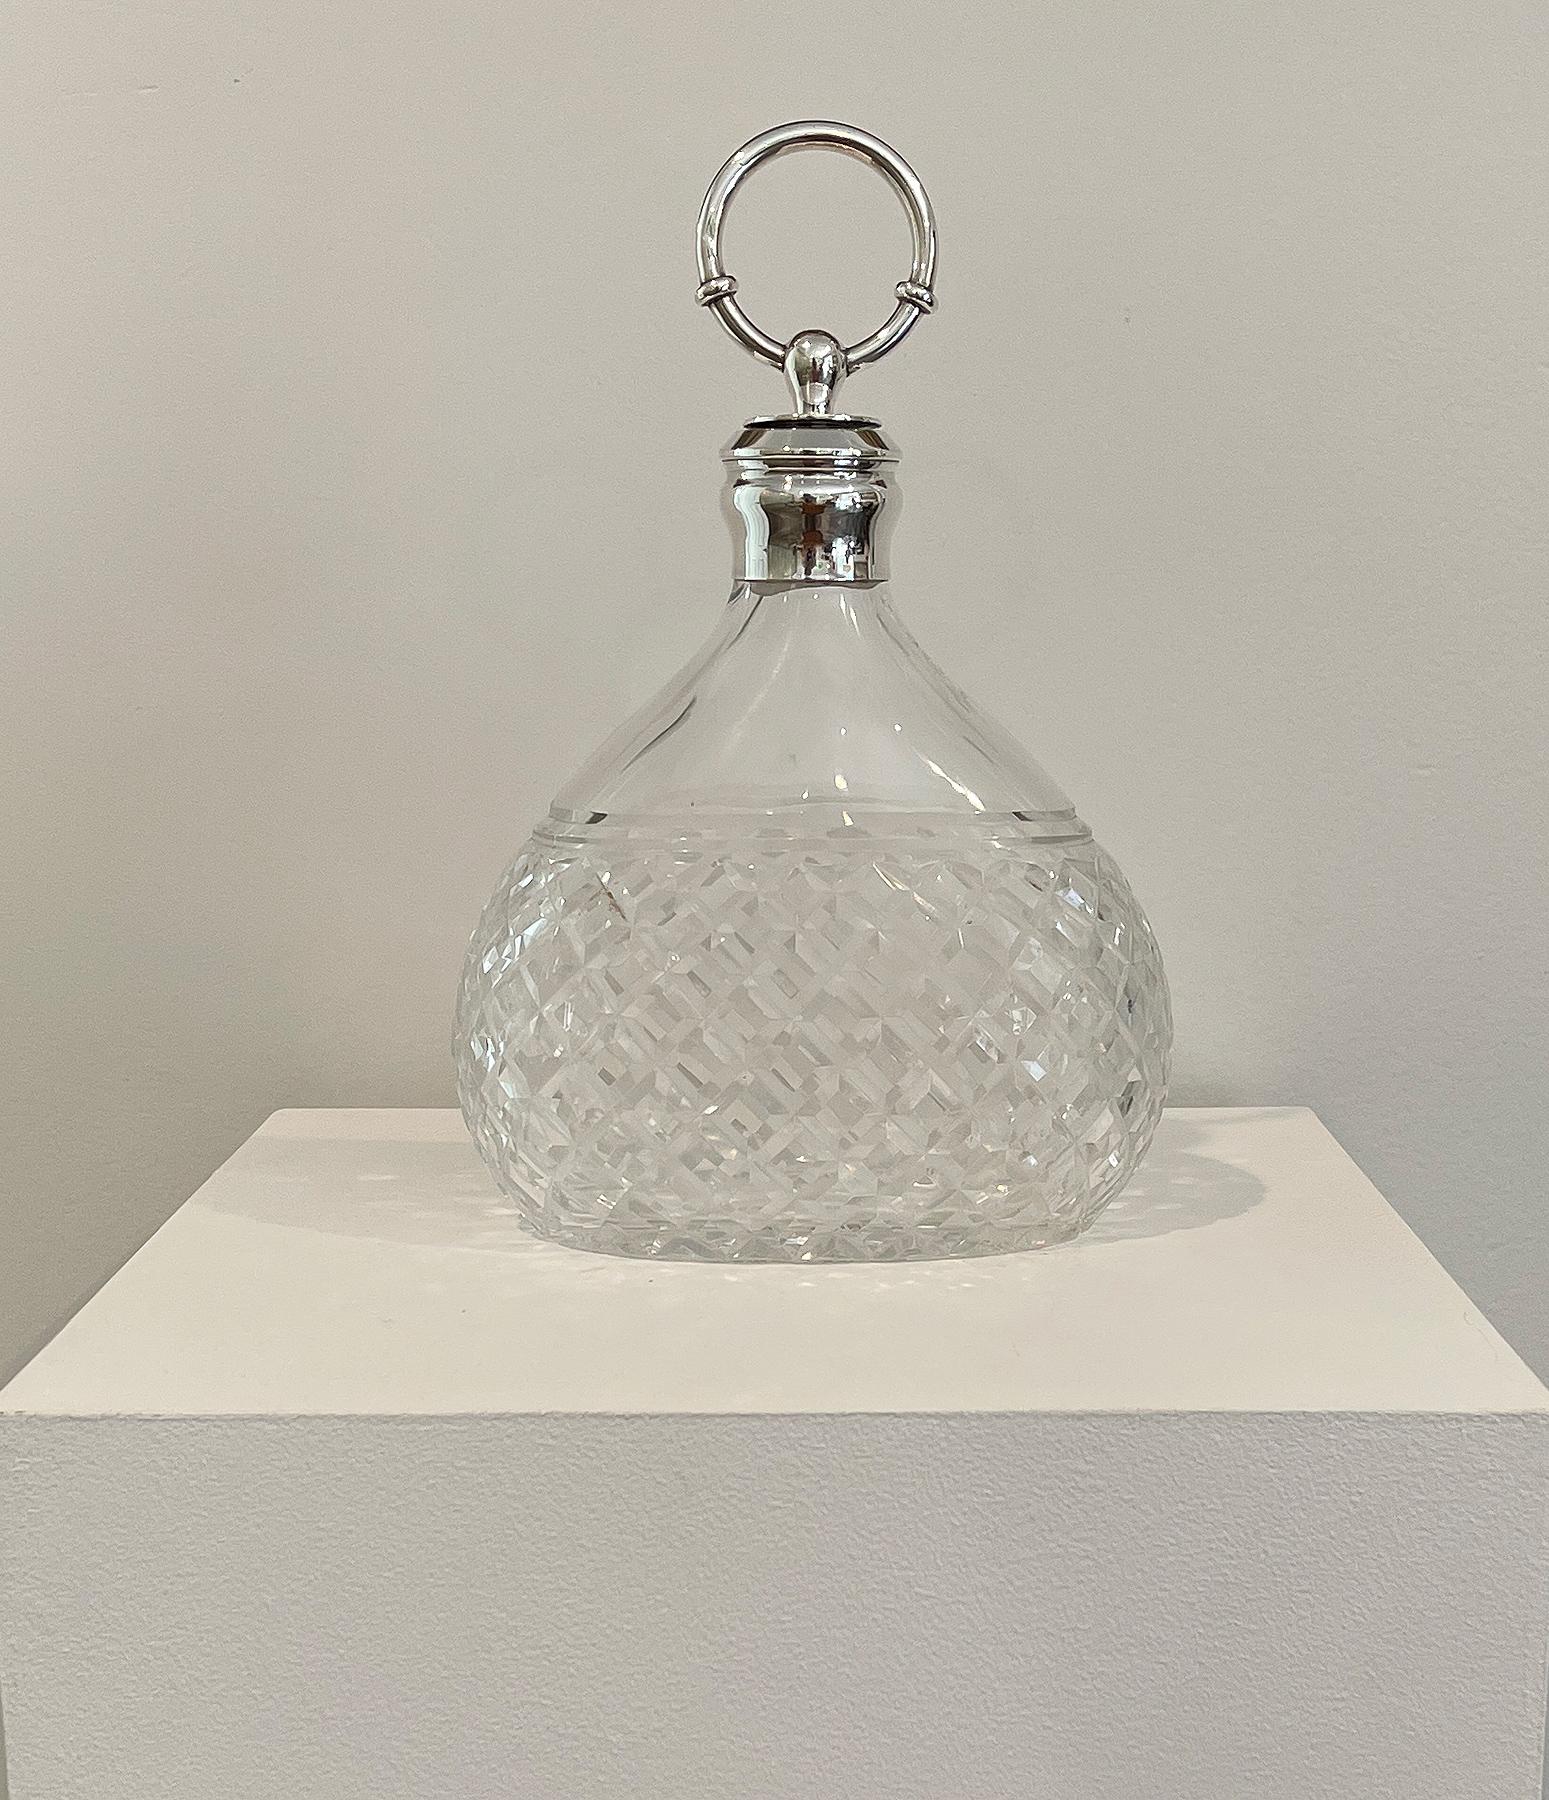 Hermes Paris

Beautiful crystal and silver decanter with a hoop sterling silver stopper covered with cork to keep alcool, airtight.
Impressed manufacturer's mark and touch marks to stopper for Hermès Paris.
Marked HERMES PARIS on crystal,